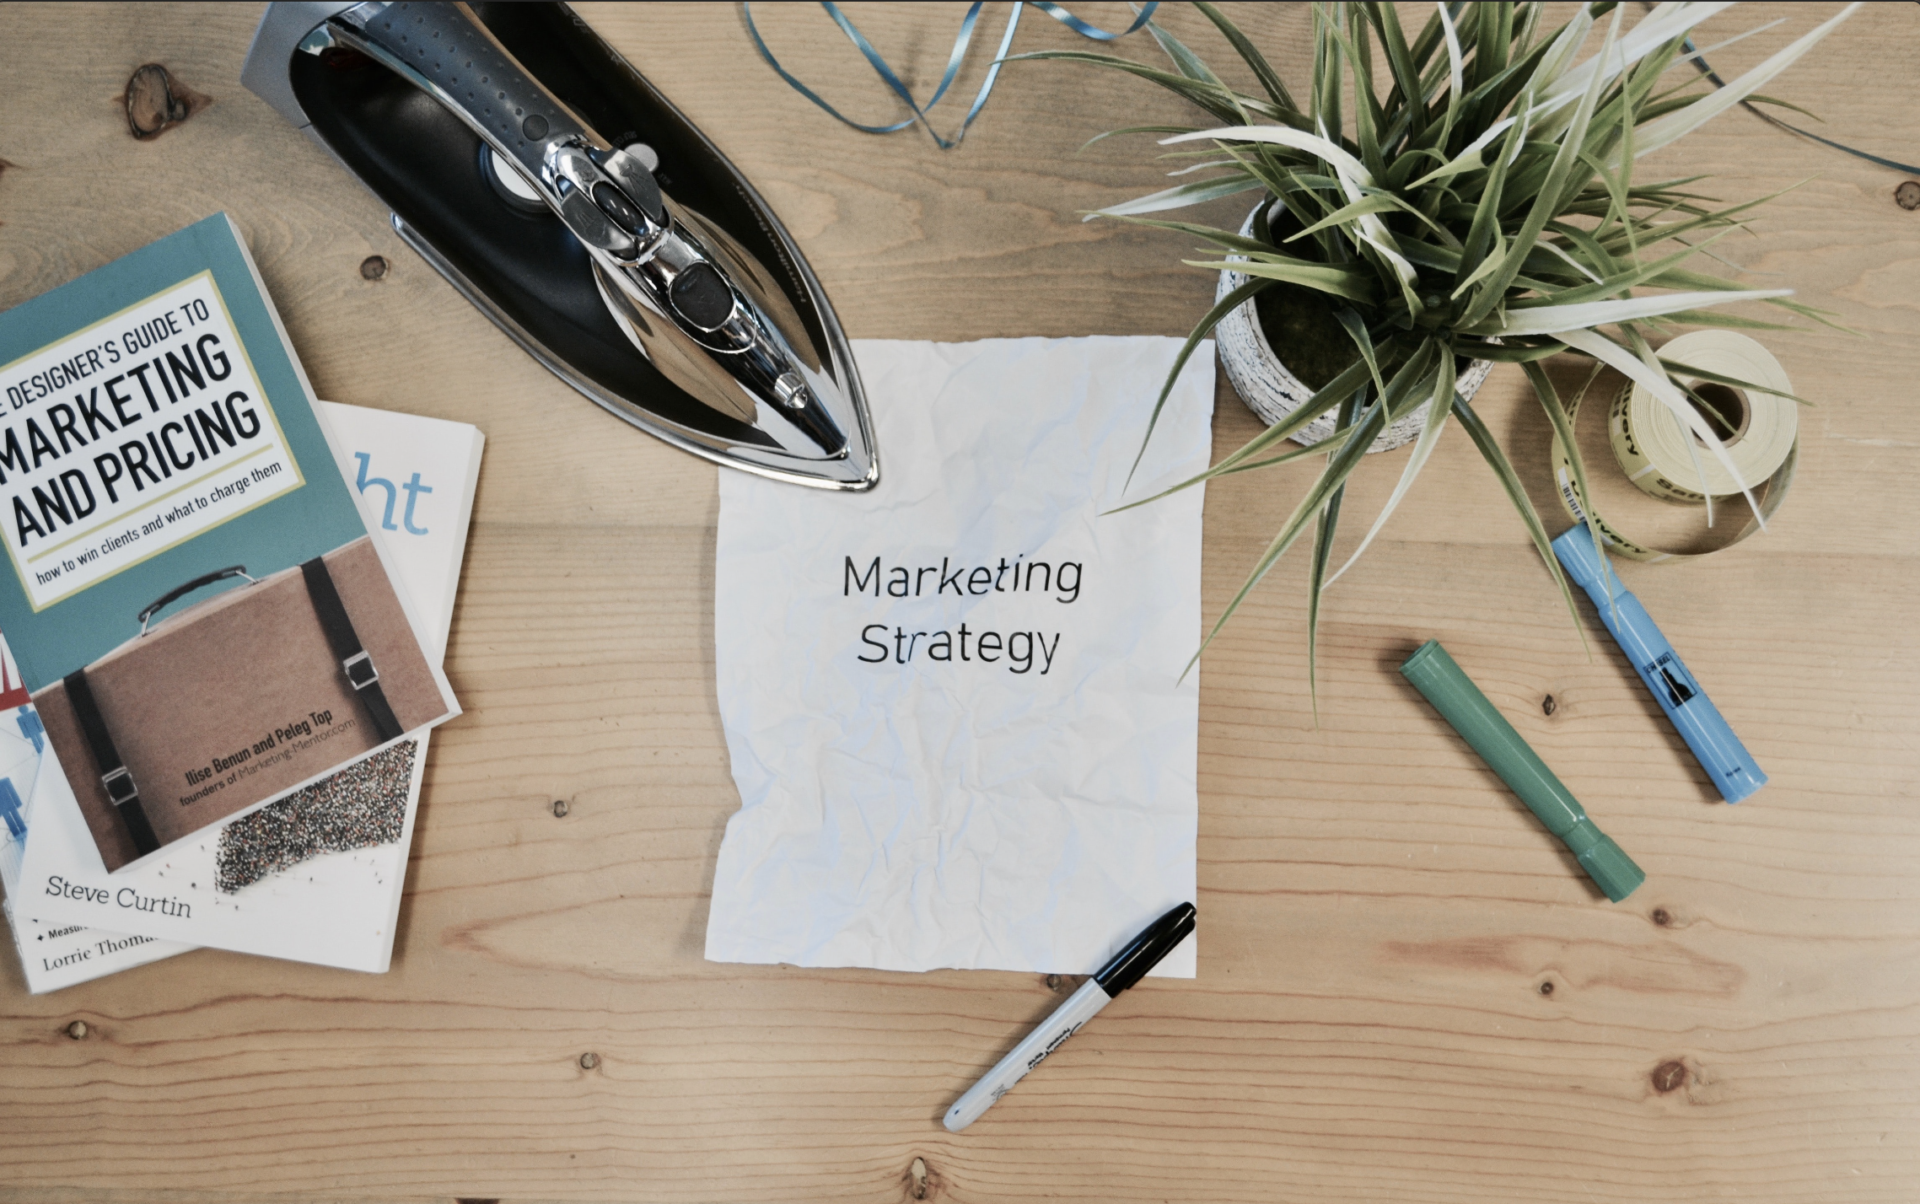 5 tips for marketing your business